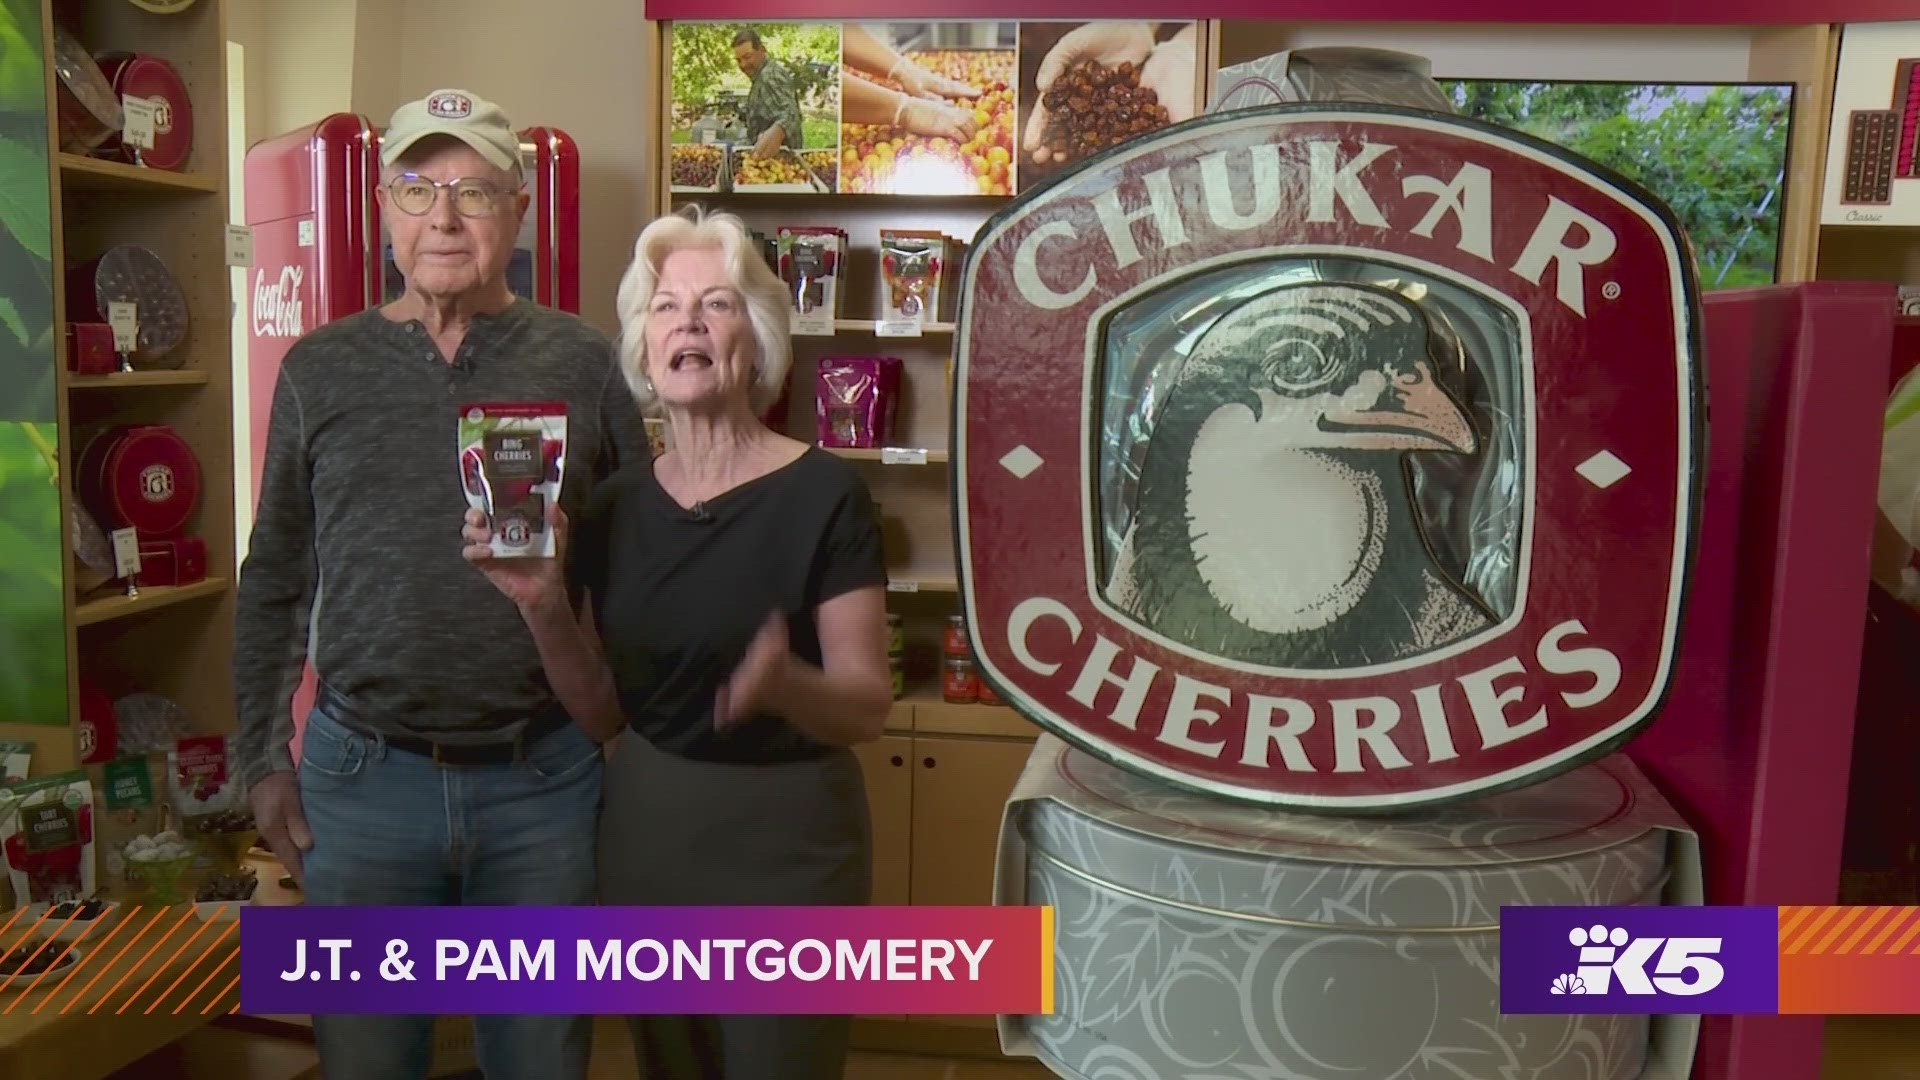 Meet the couple behind Chukar Cherries, one of the great tastes of the Pacific Northwest. #k5evening